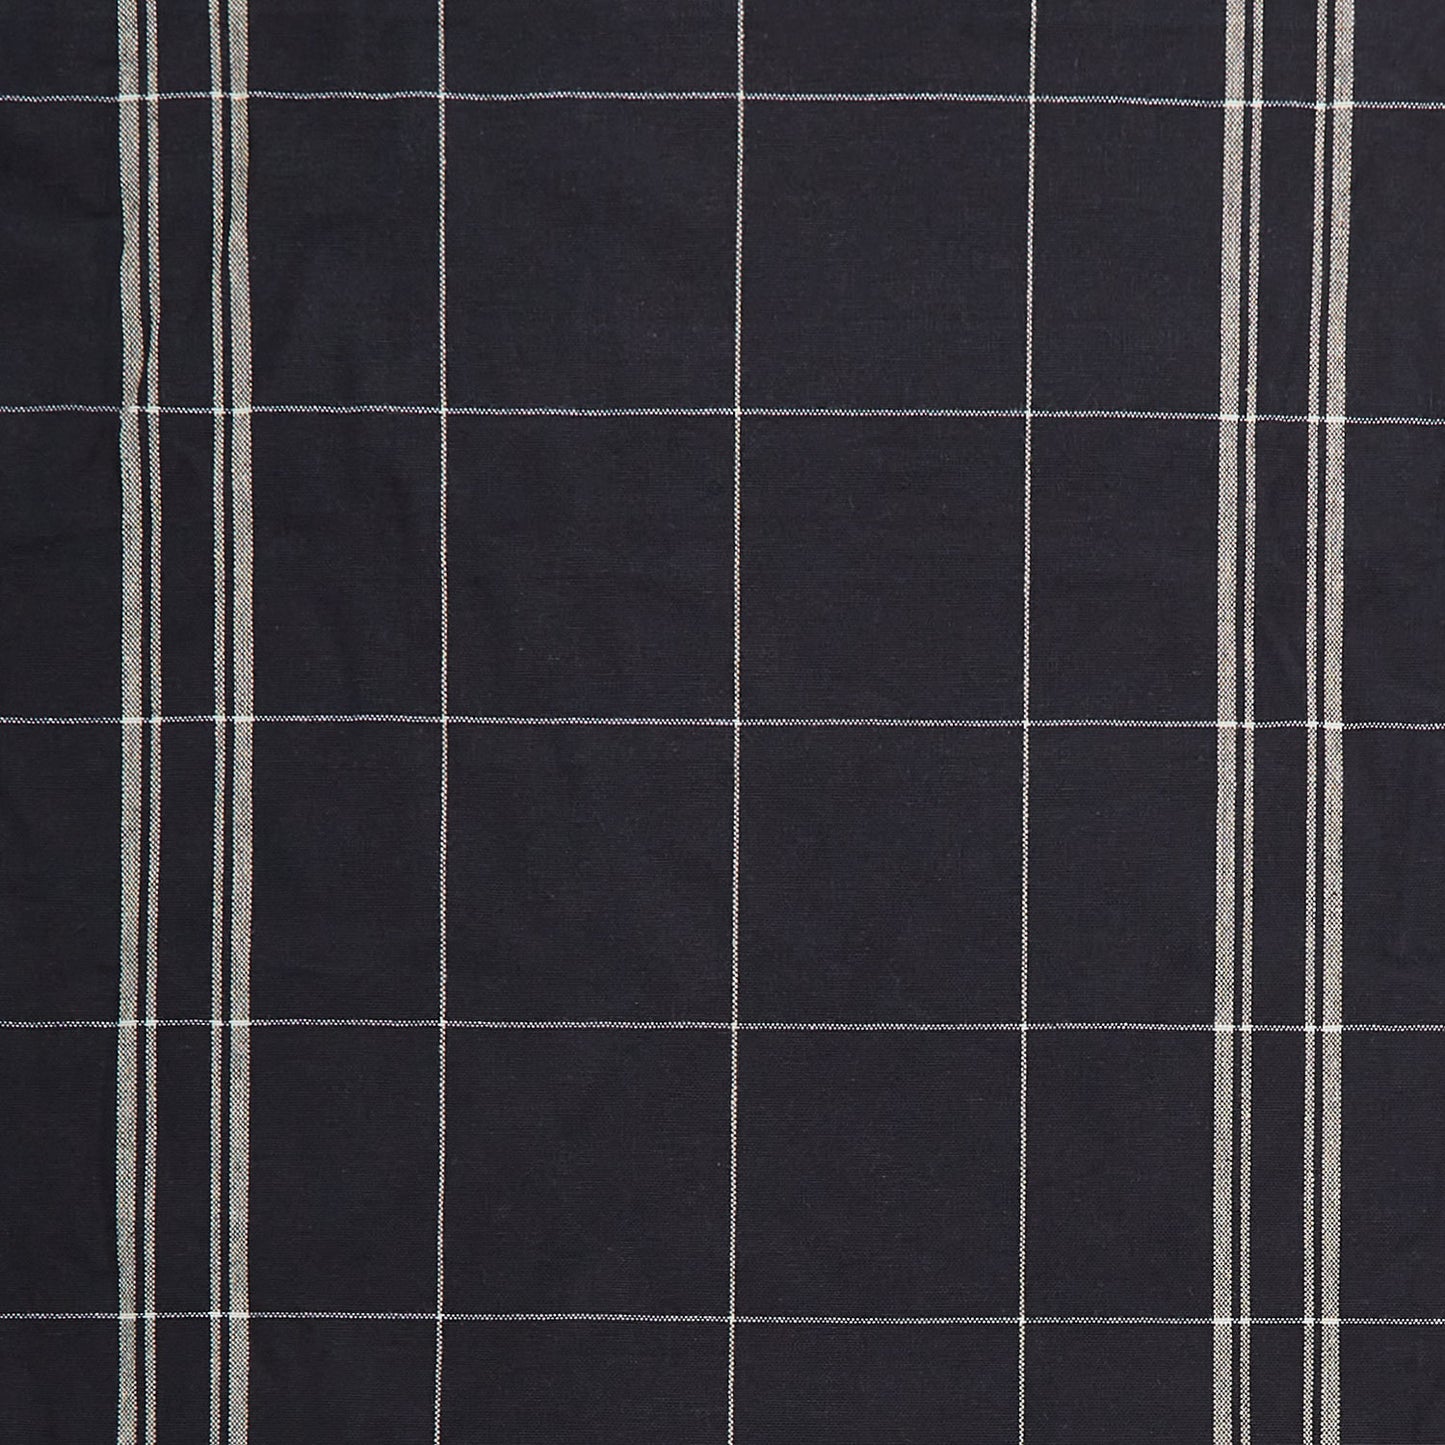 Easy Living Toweling - Check and Stripe Black Flax Yardage Primary Image